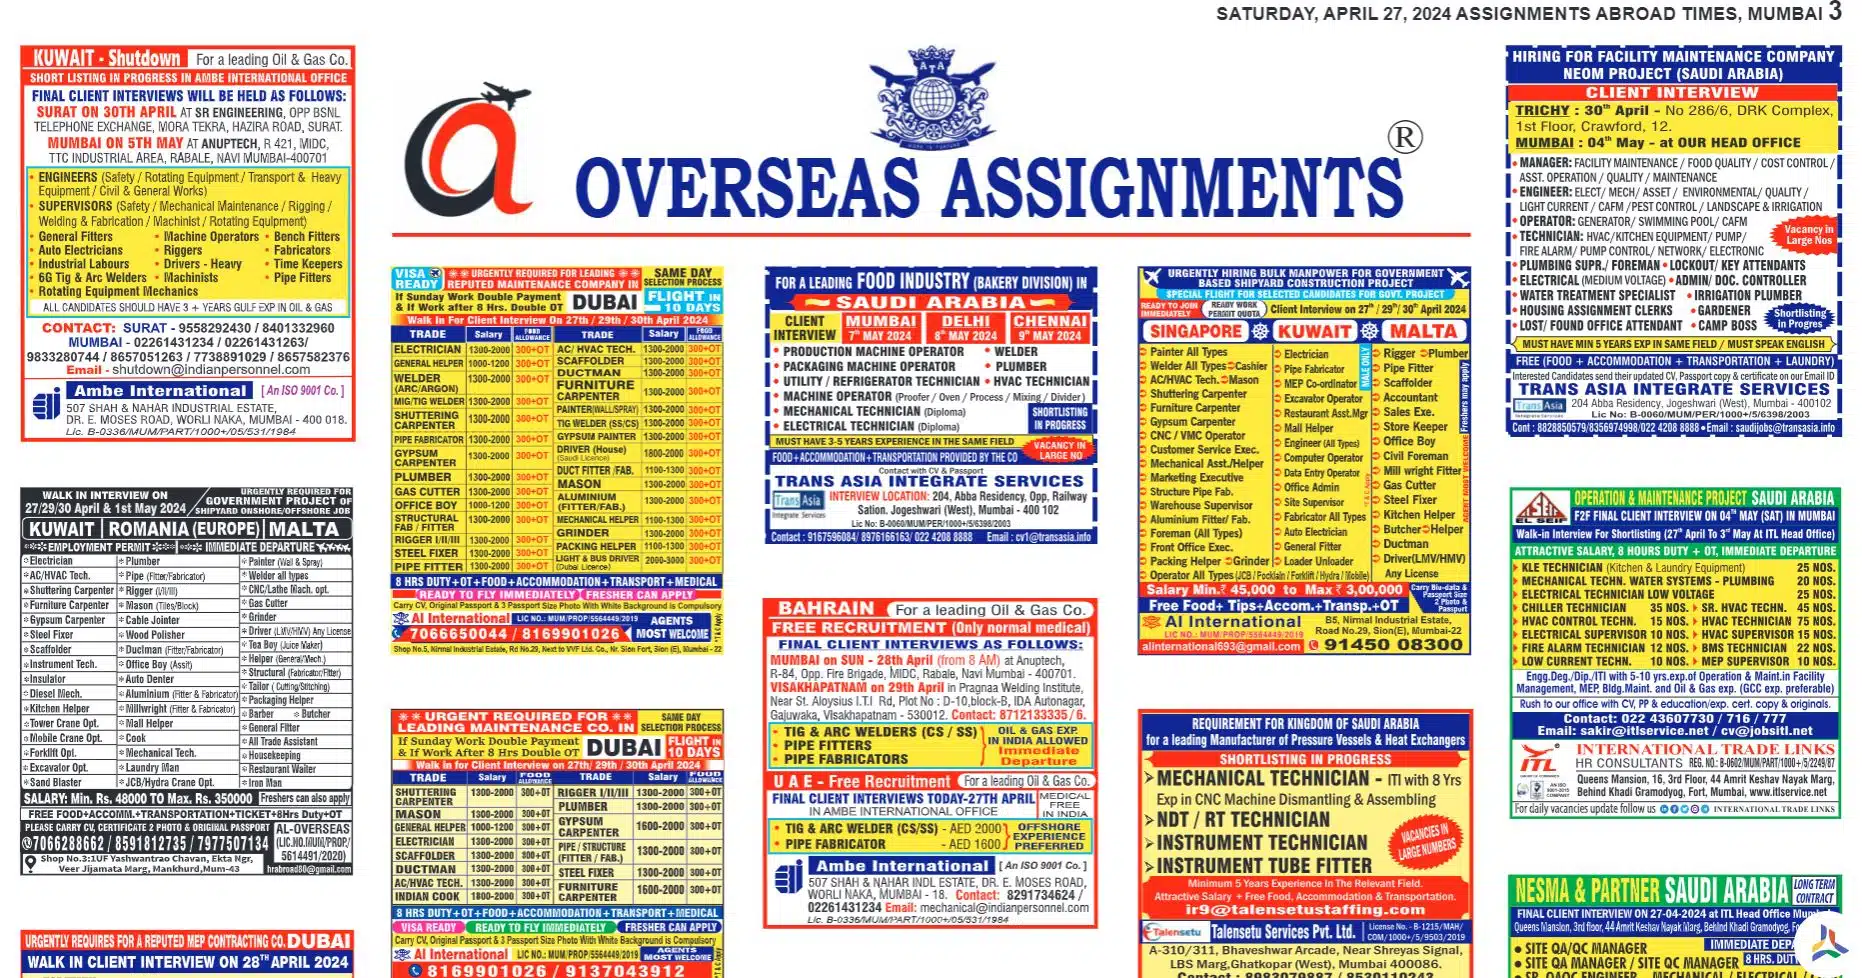 assignment abroad times 6 april 2022